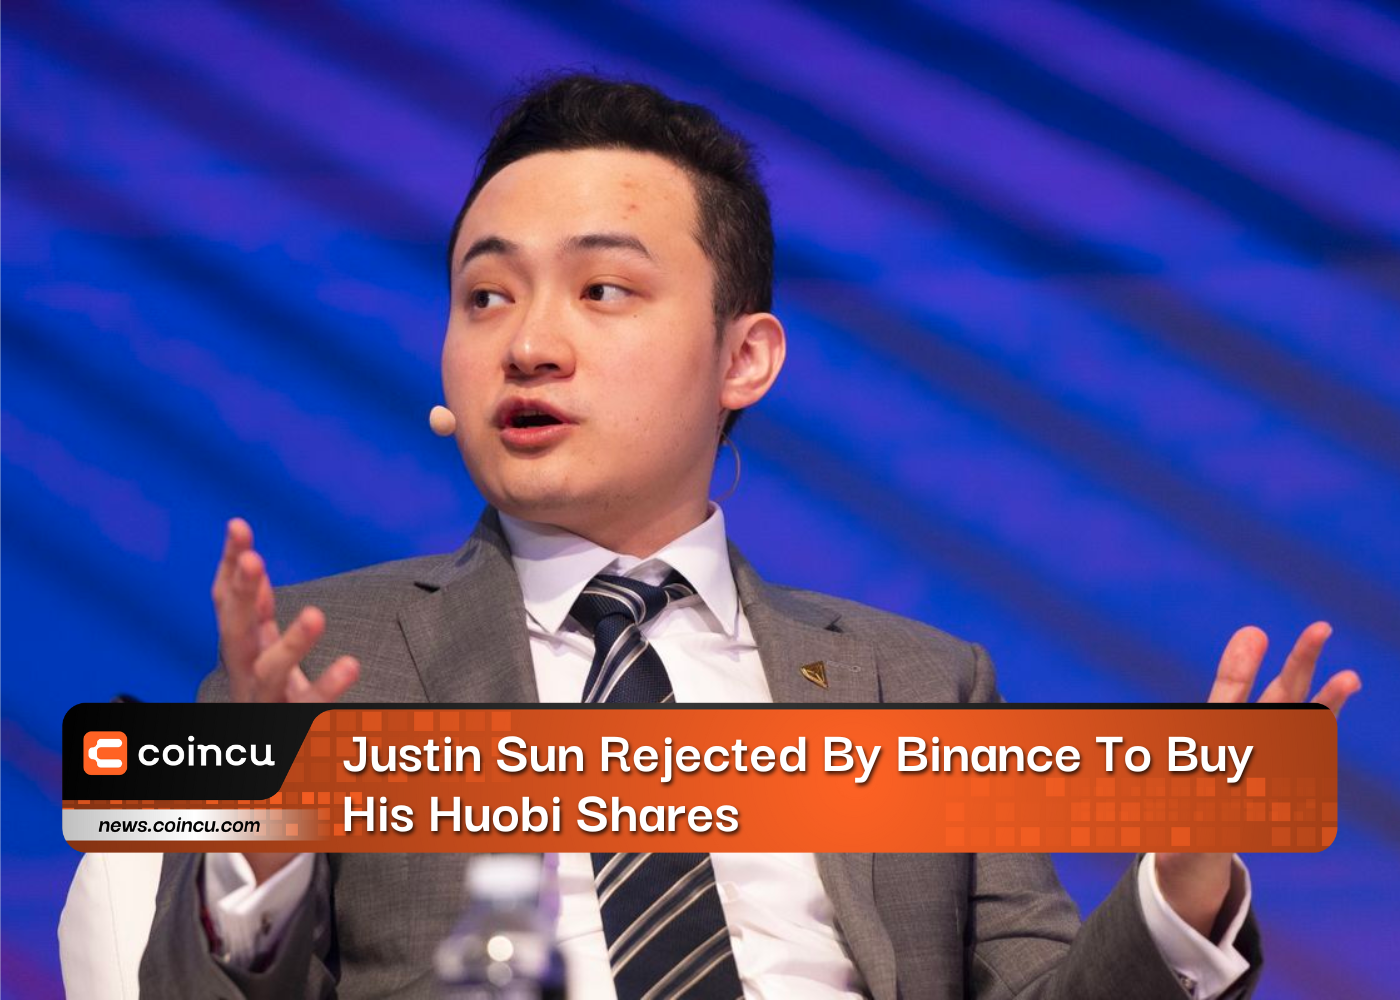 Justin Sun Rejected By Binance To Buy His Huobi Shares